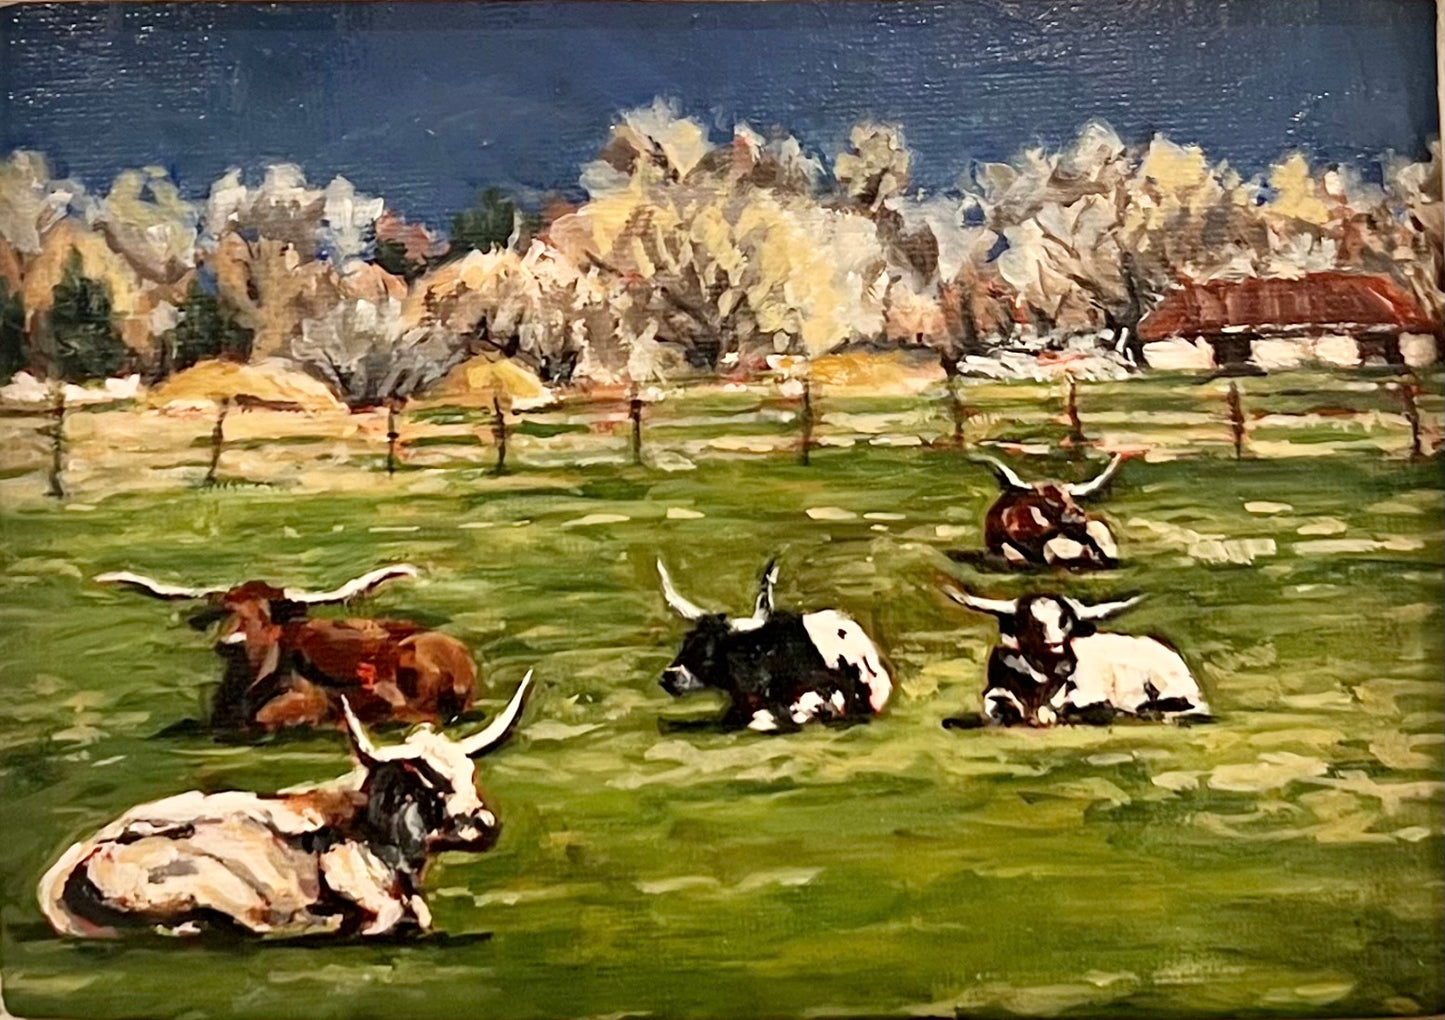 "Golden Hour at Pasture" 10x12 Oil on Canvas